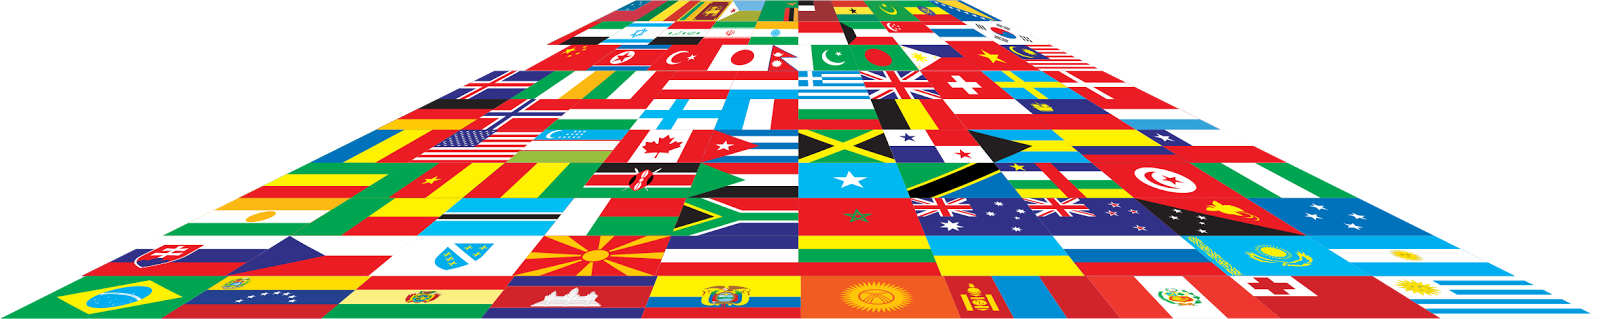 world cup flags clipart - photo #15